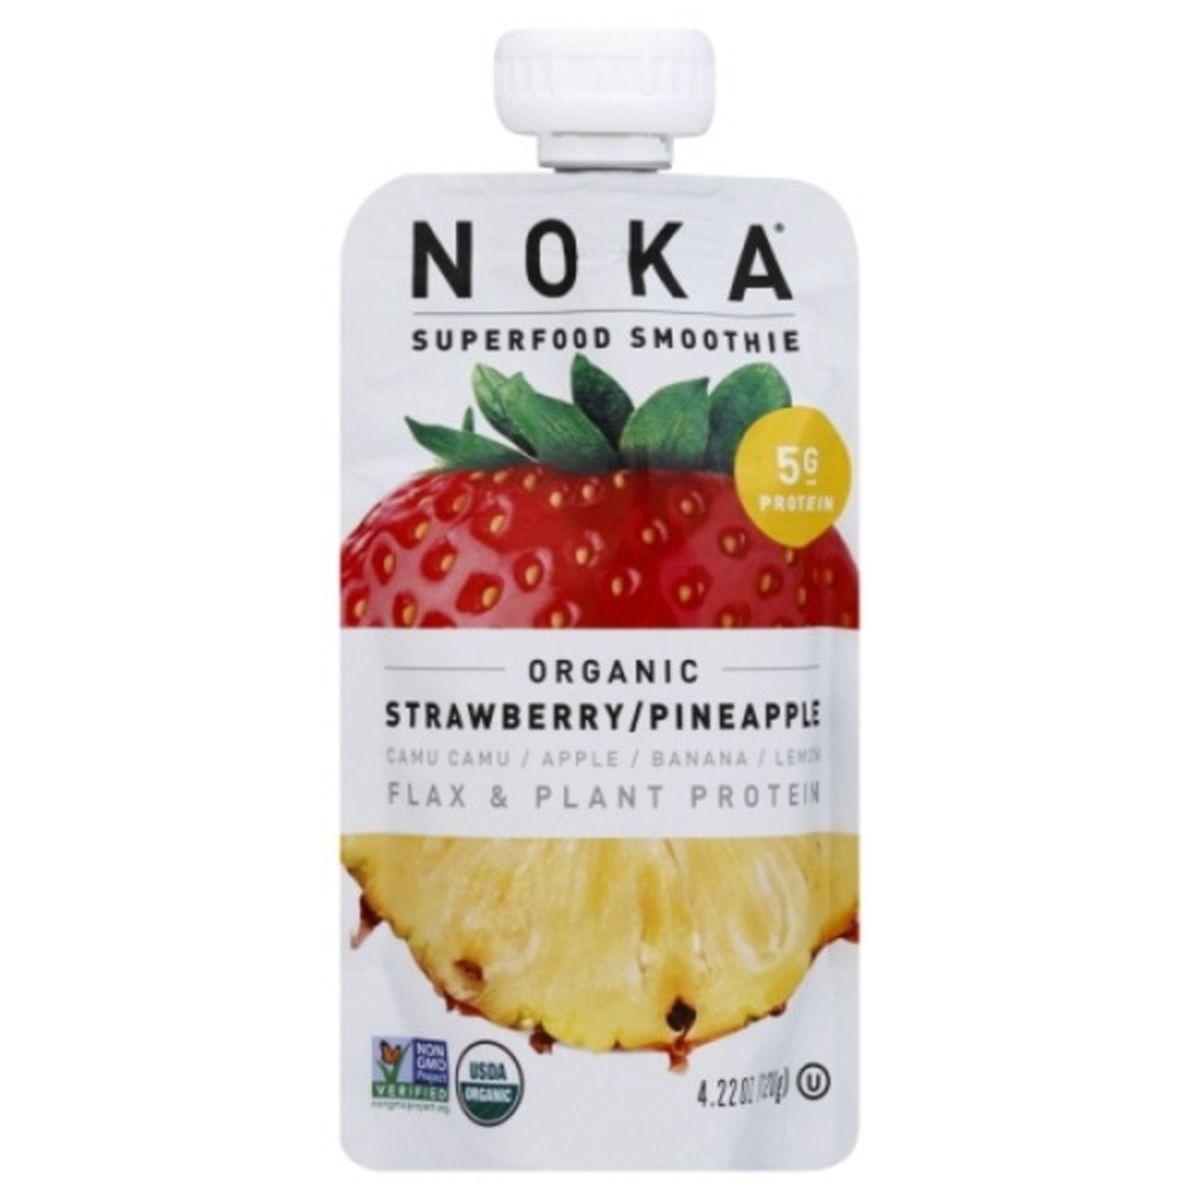 Calories in Noka Smoothie, Superfood, Organic, Strawberry/Pineapple